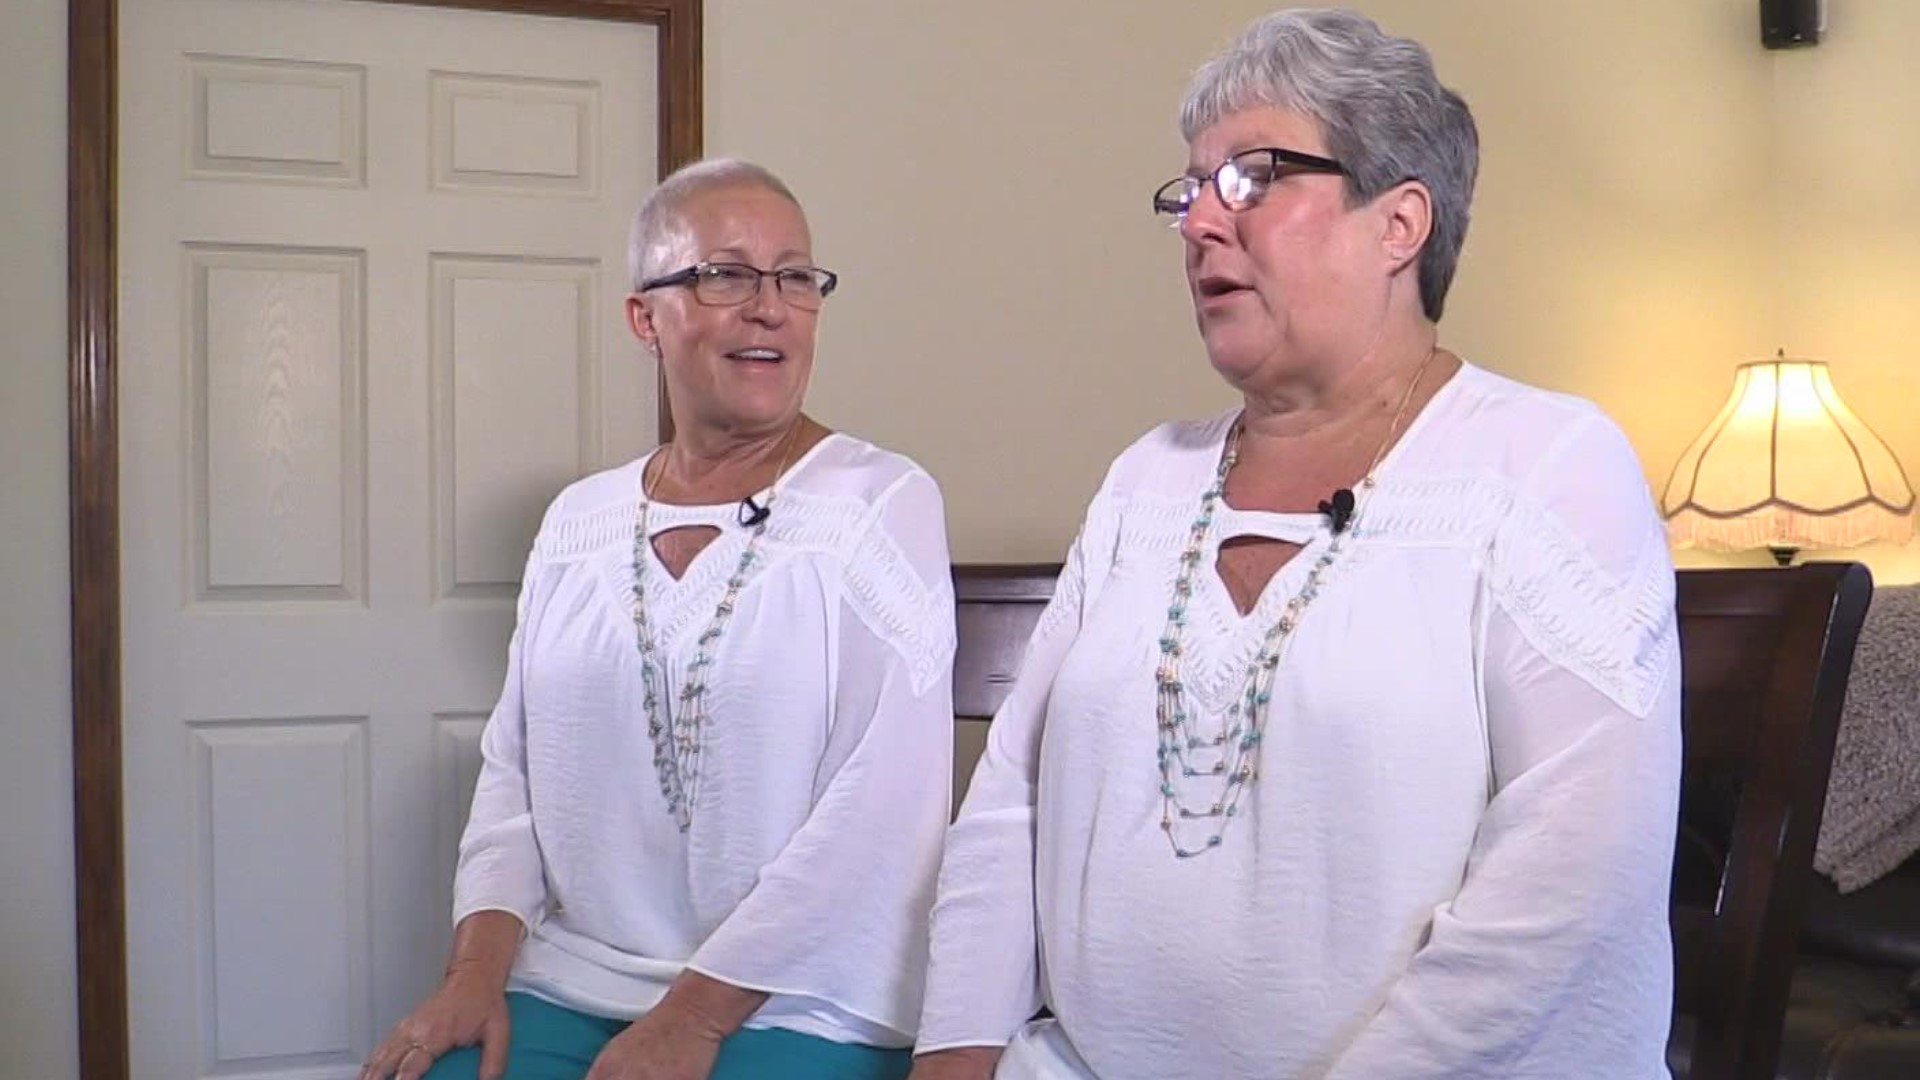 Identical twin sisters who have lived their lives in sync are now facing the same battle against ovarian cancer.